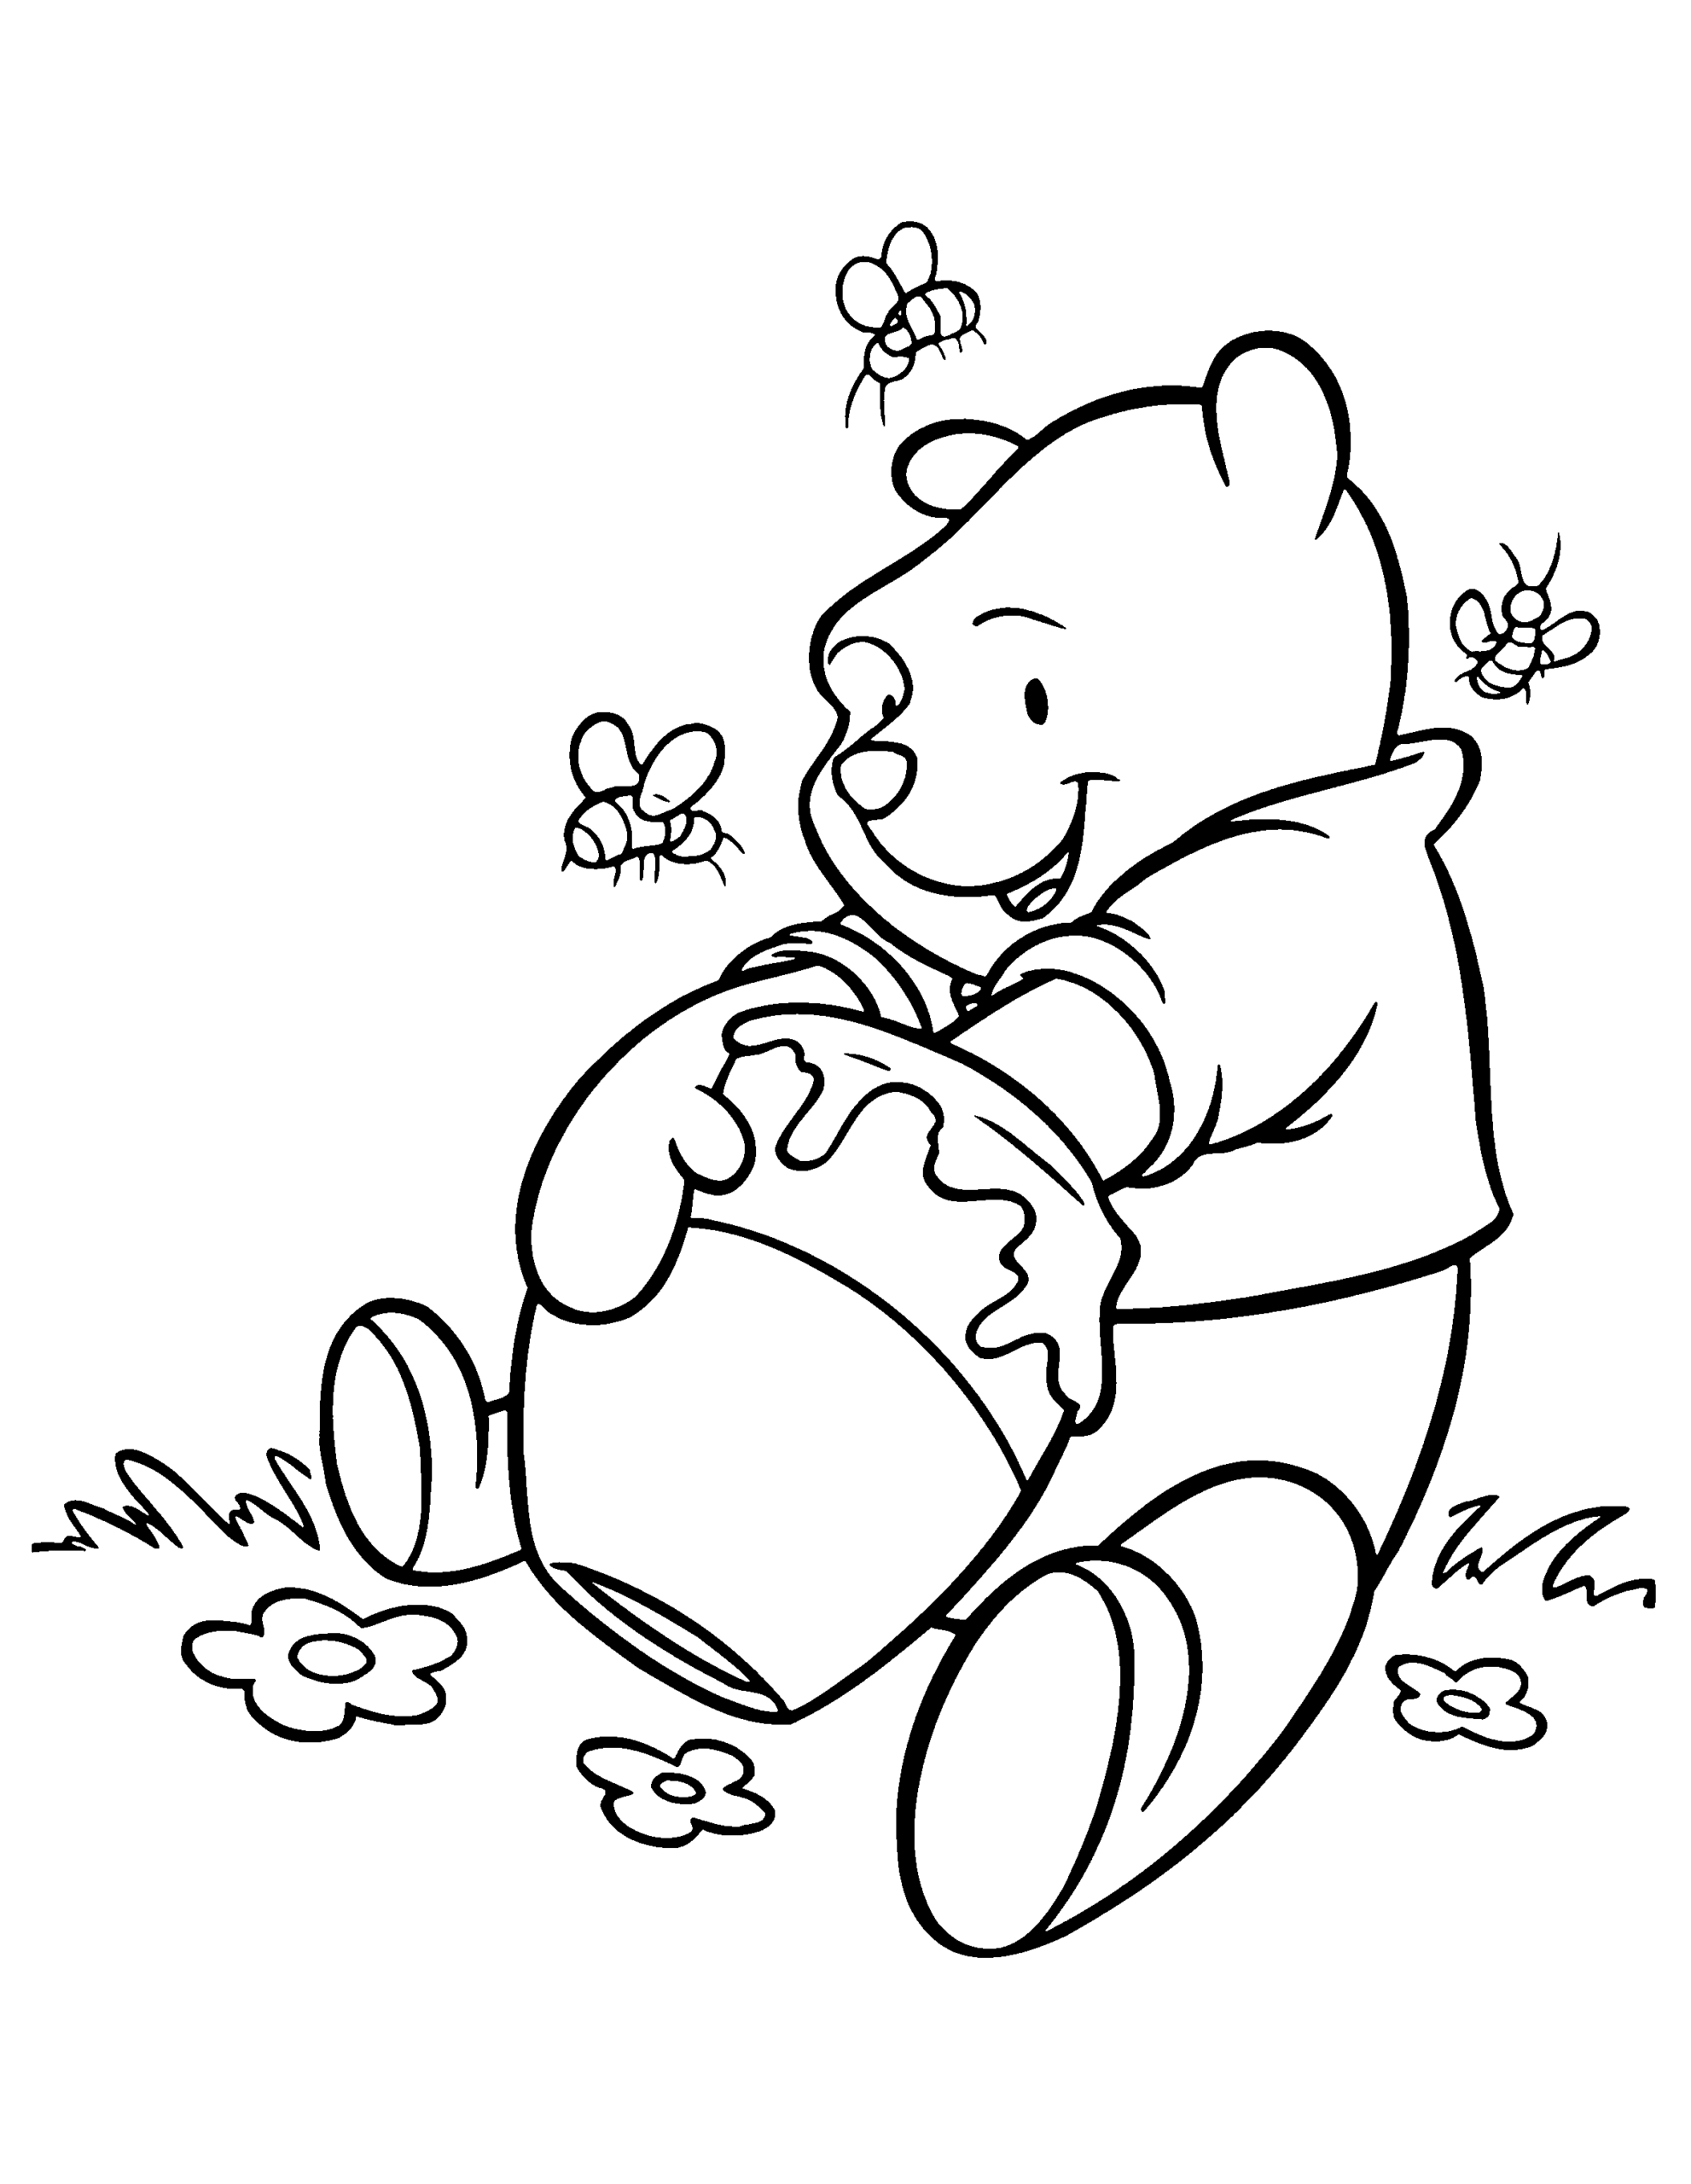 Winnie the Pooh Coloring Pages Cartoons For Winnie The Pooh Printable 2020 6939 Coloring4free